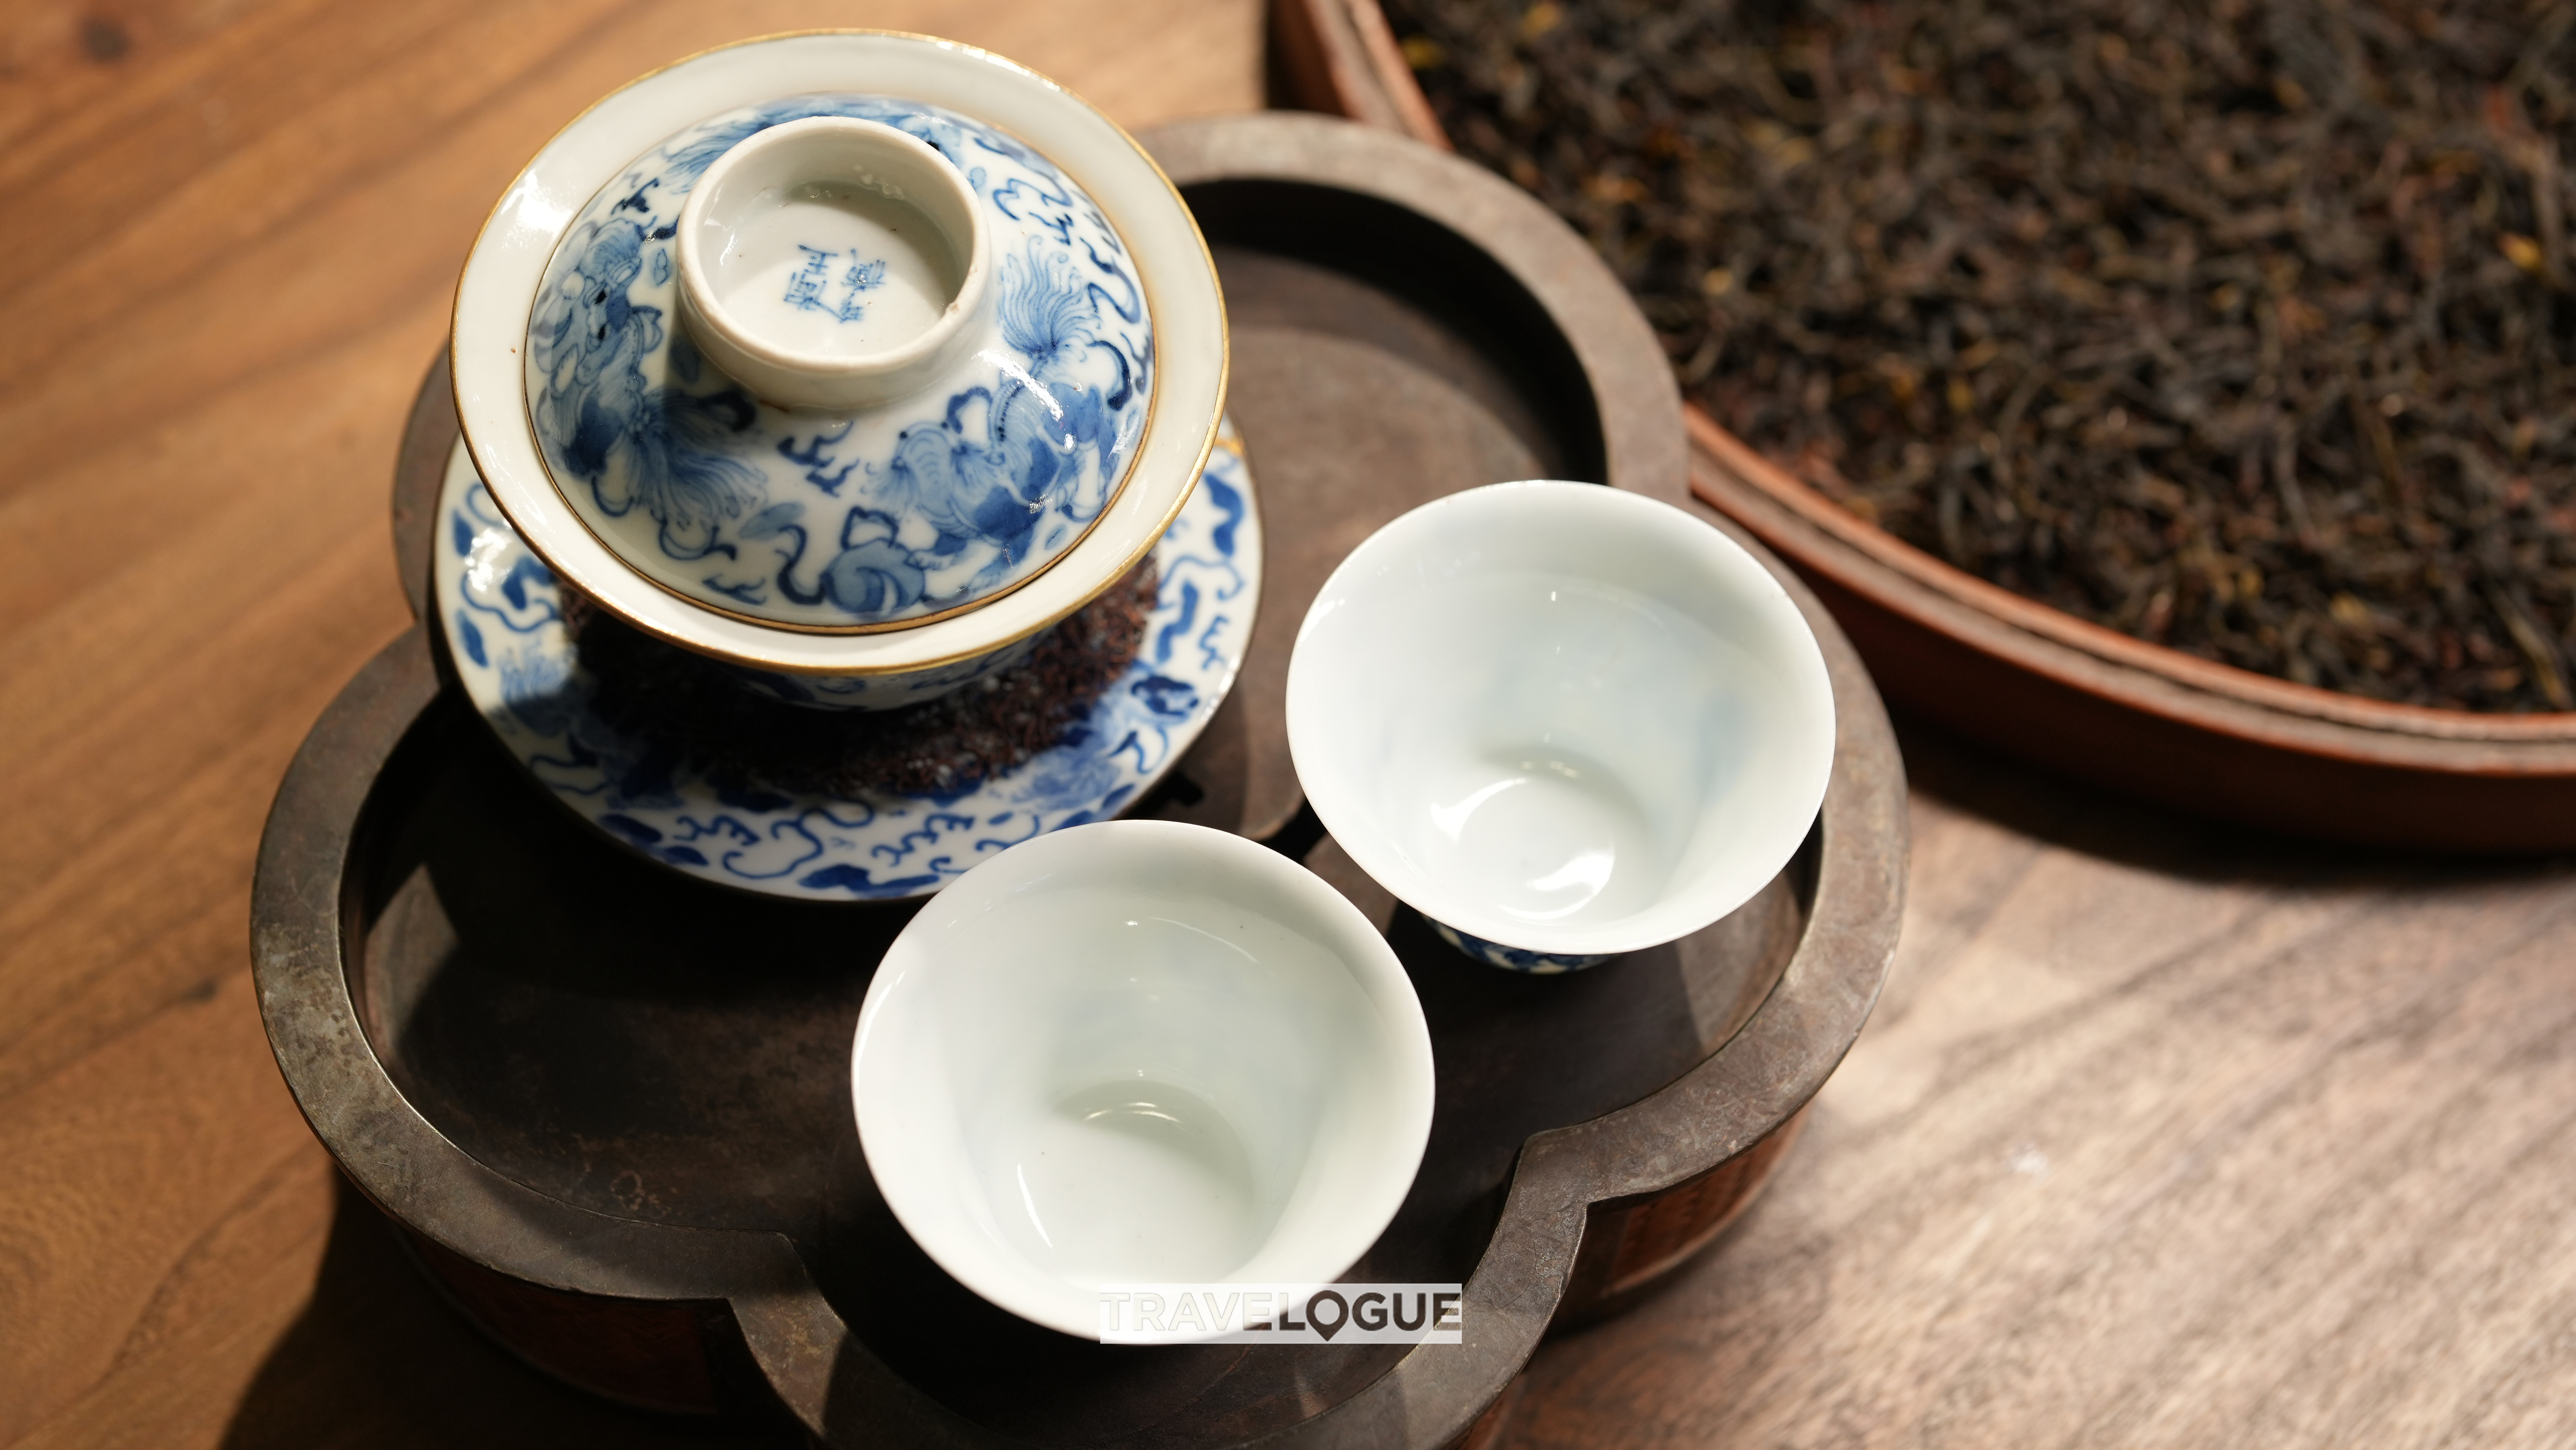 Oolong tea ceremony utensils are on display at an oolong tea-baking workshop in Shantou, Guangdong Province. /CGTN